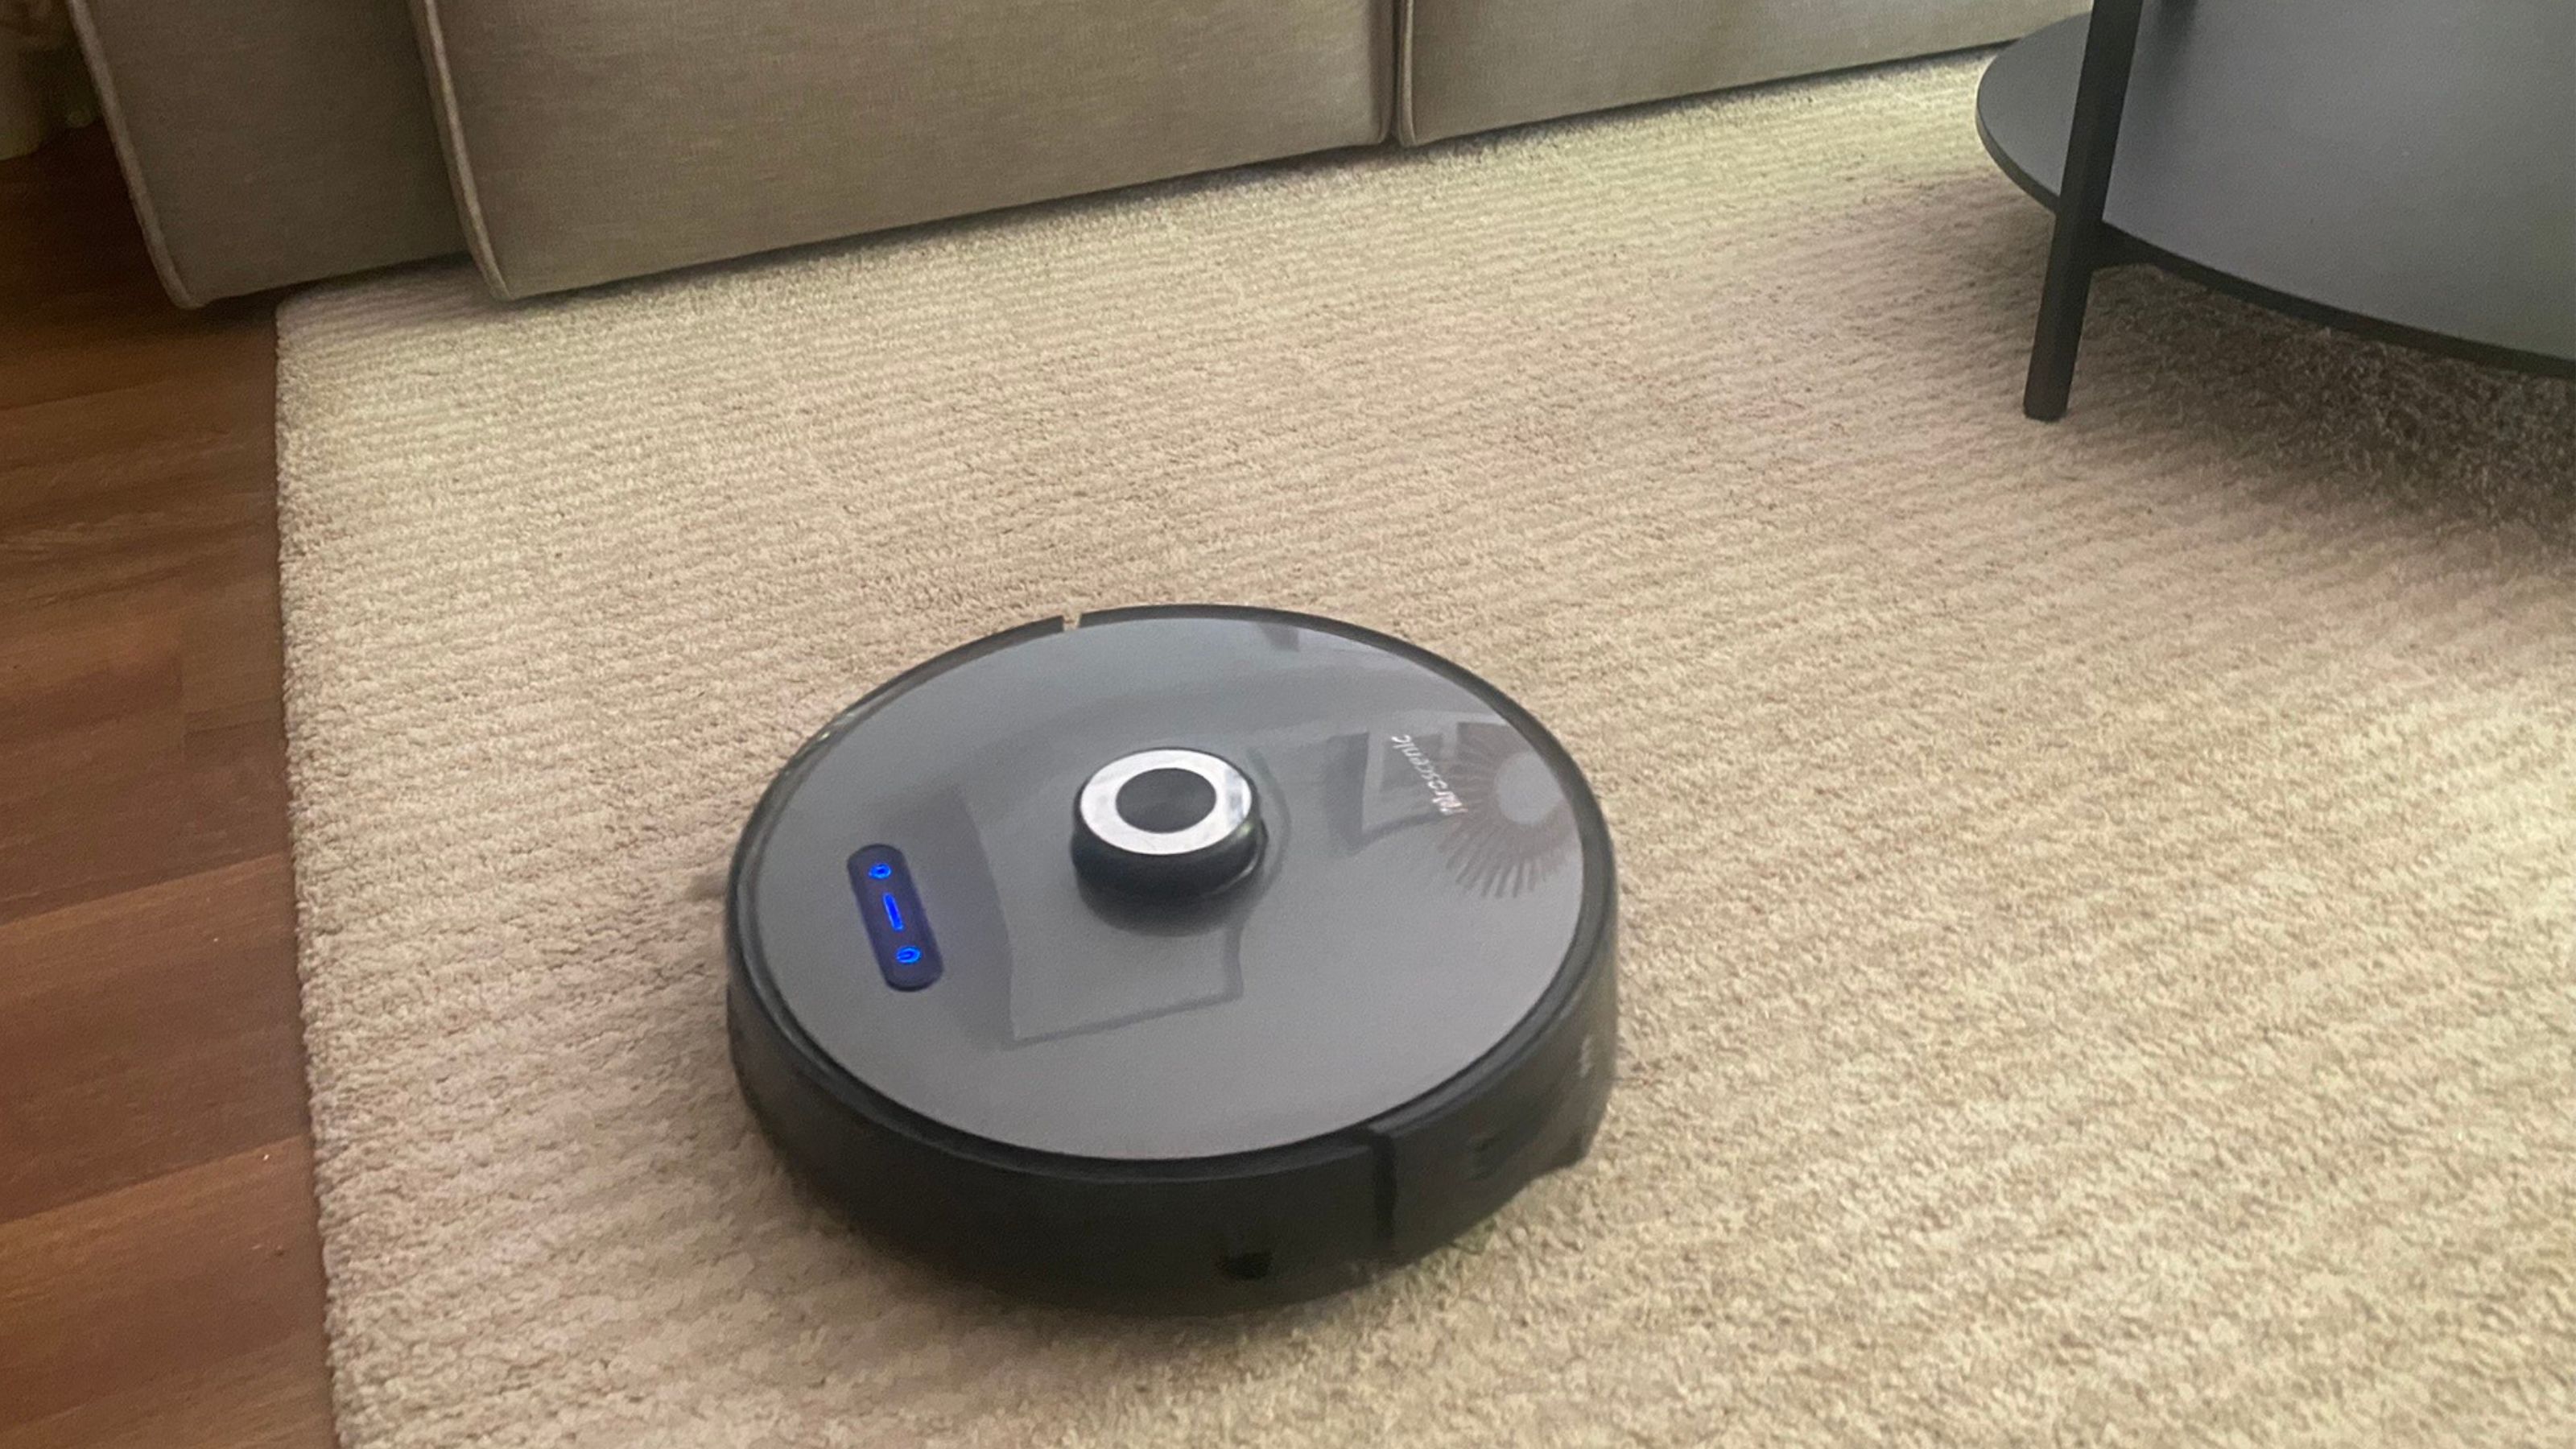 Proscenic M8 Pro Robot Vacuum Cleaner review